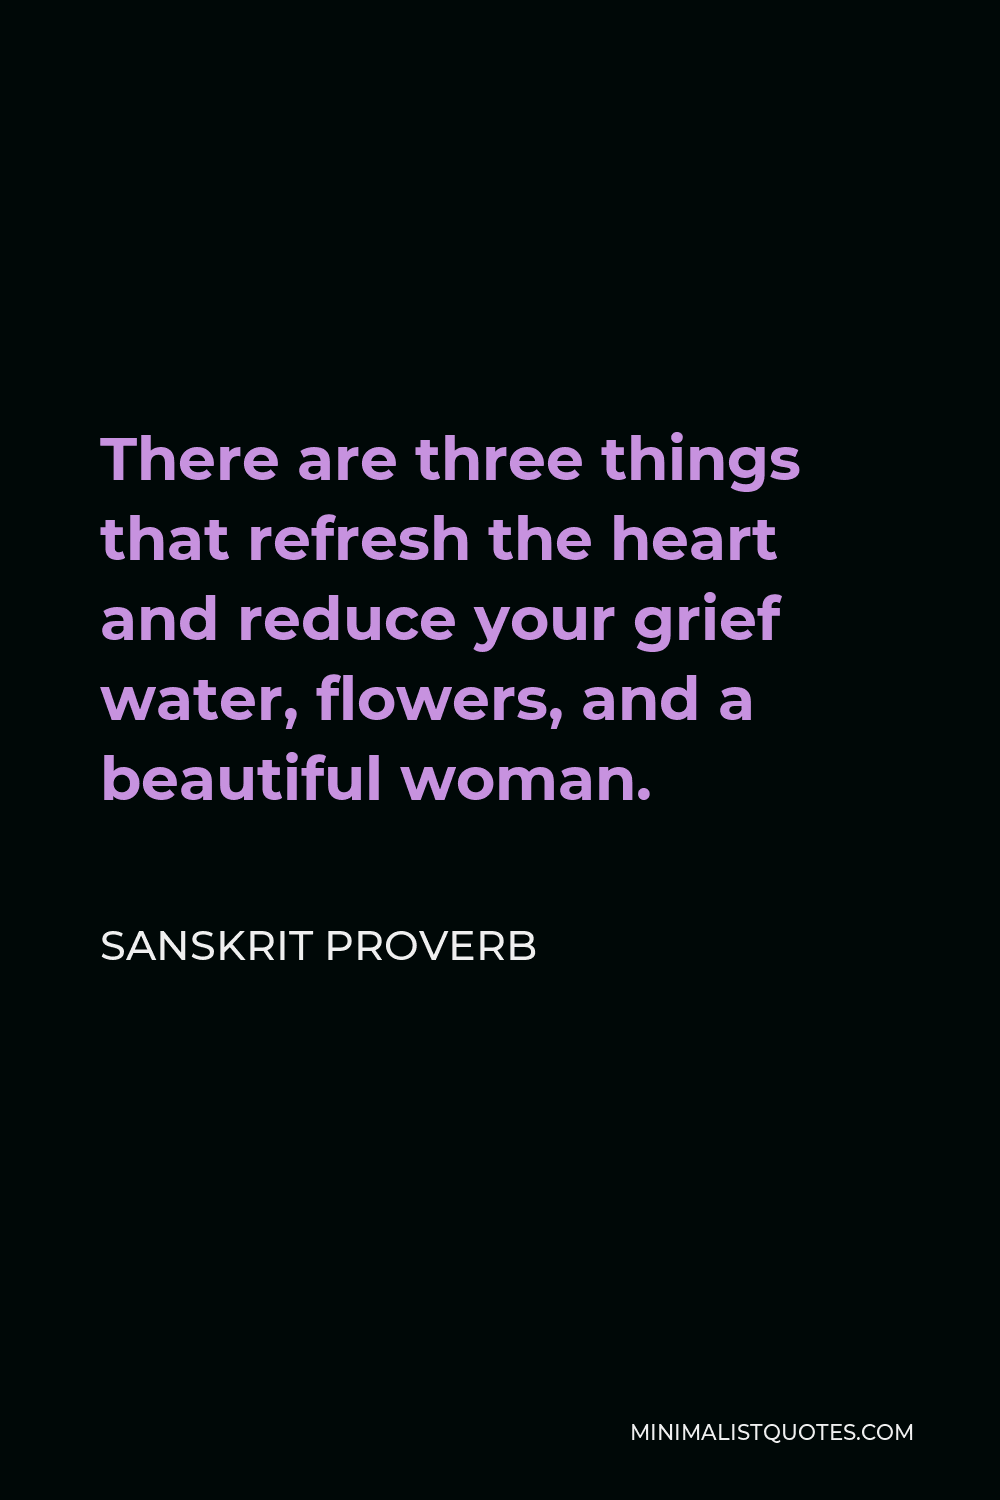 Sanskrit Proverb Quote - There are three things that refresh the heart and reduce your grief water, flowers, and a beautiful woman.